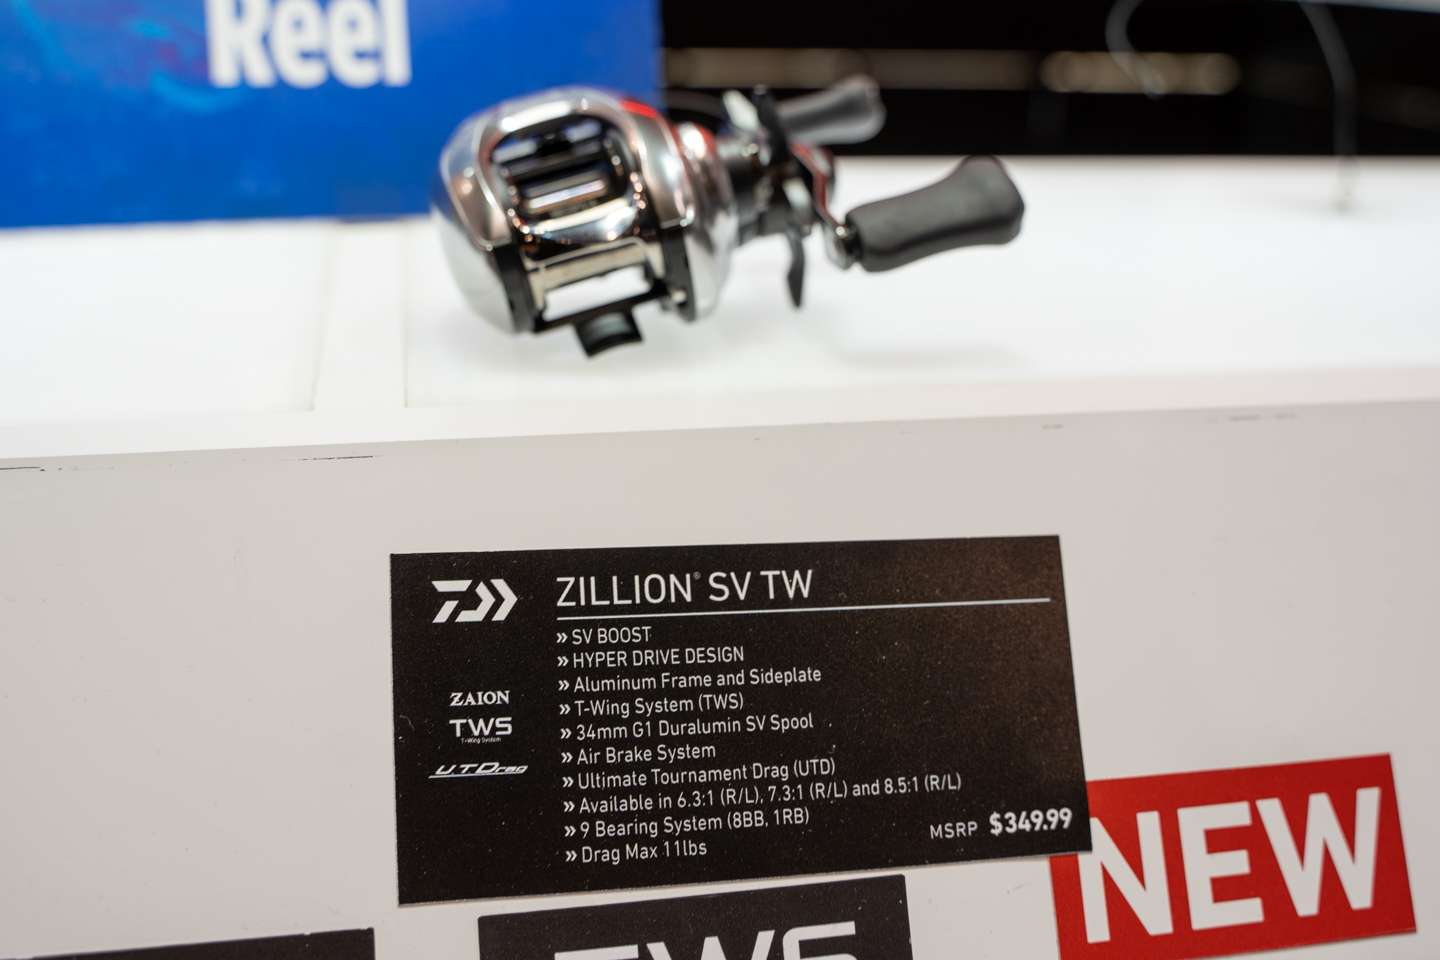 Casting distance and accuracy are no problem with Daiwaâs patented T-Wing System and unique braking system.